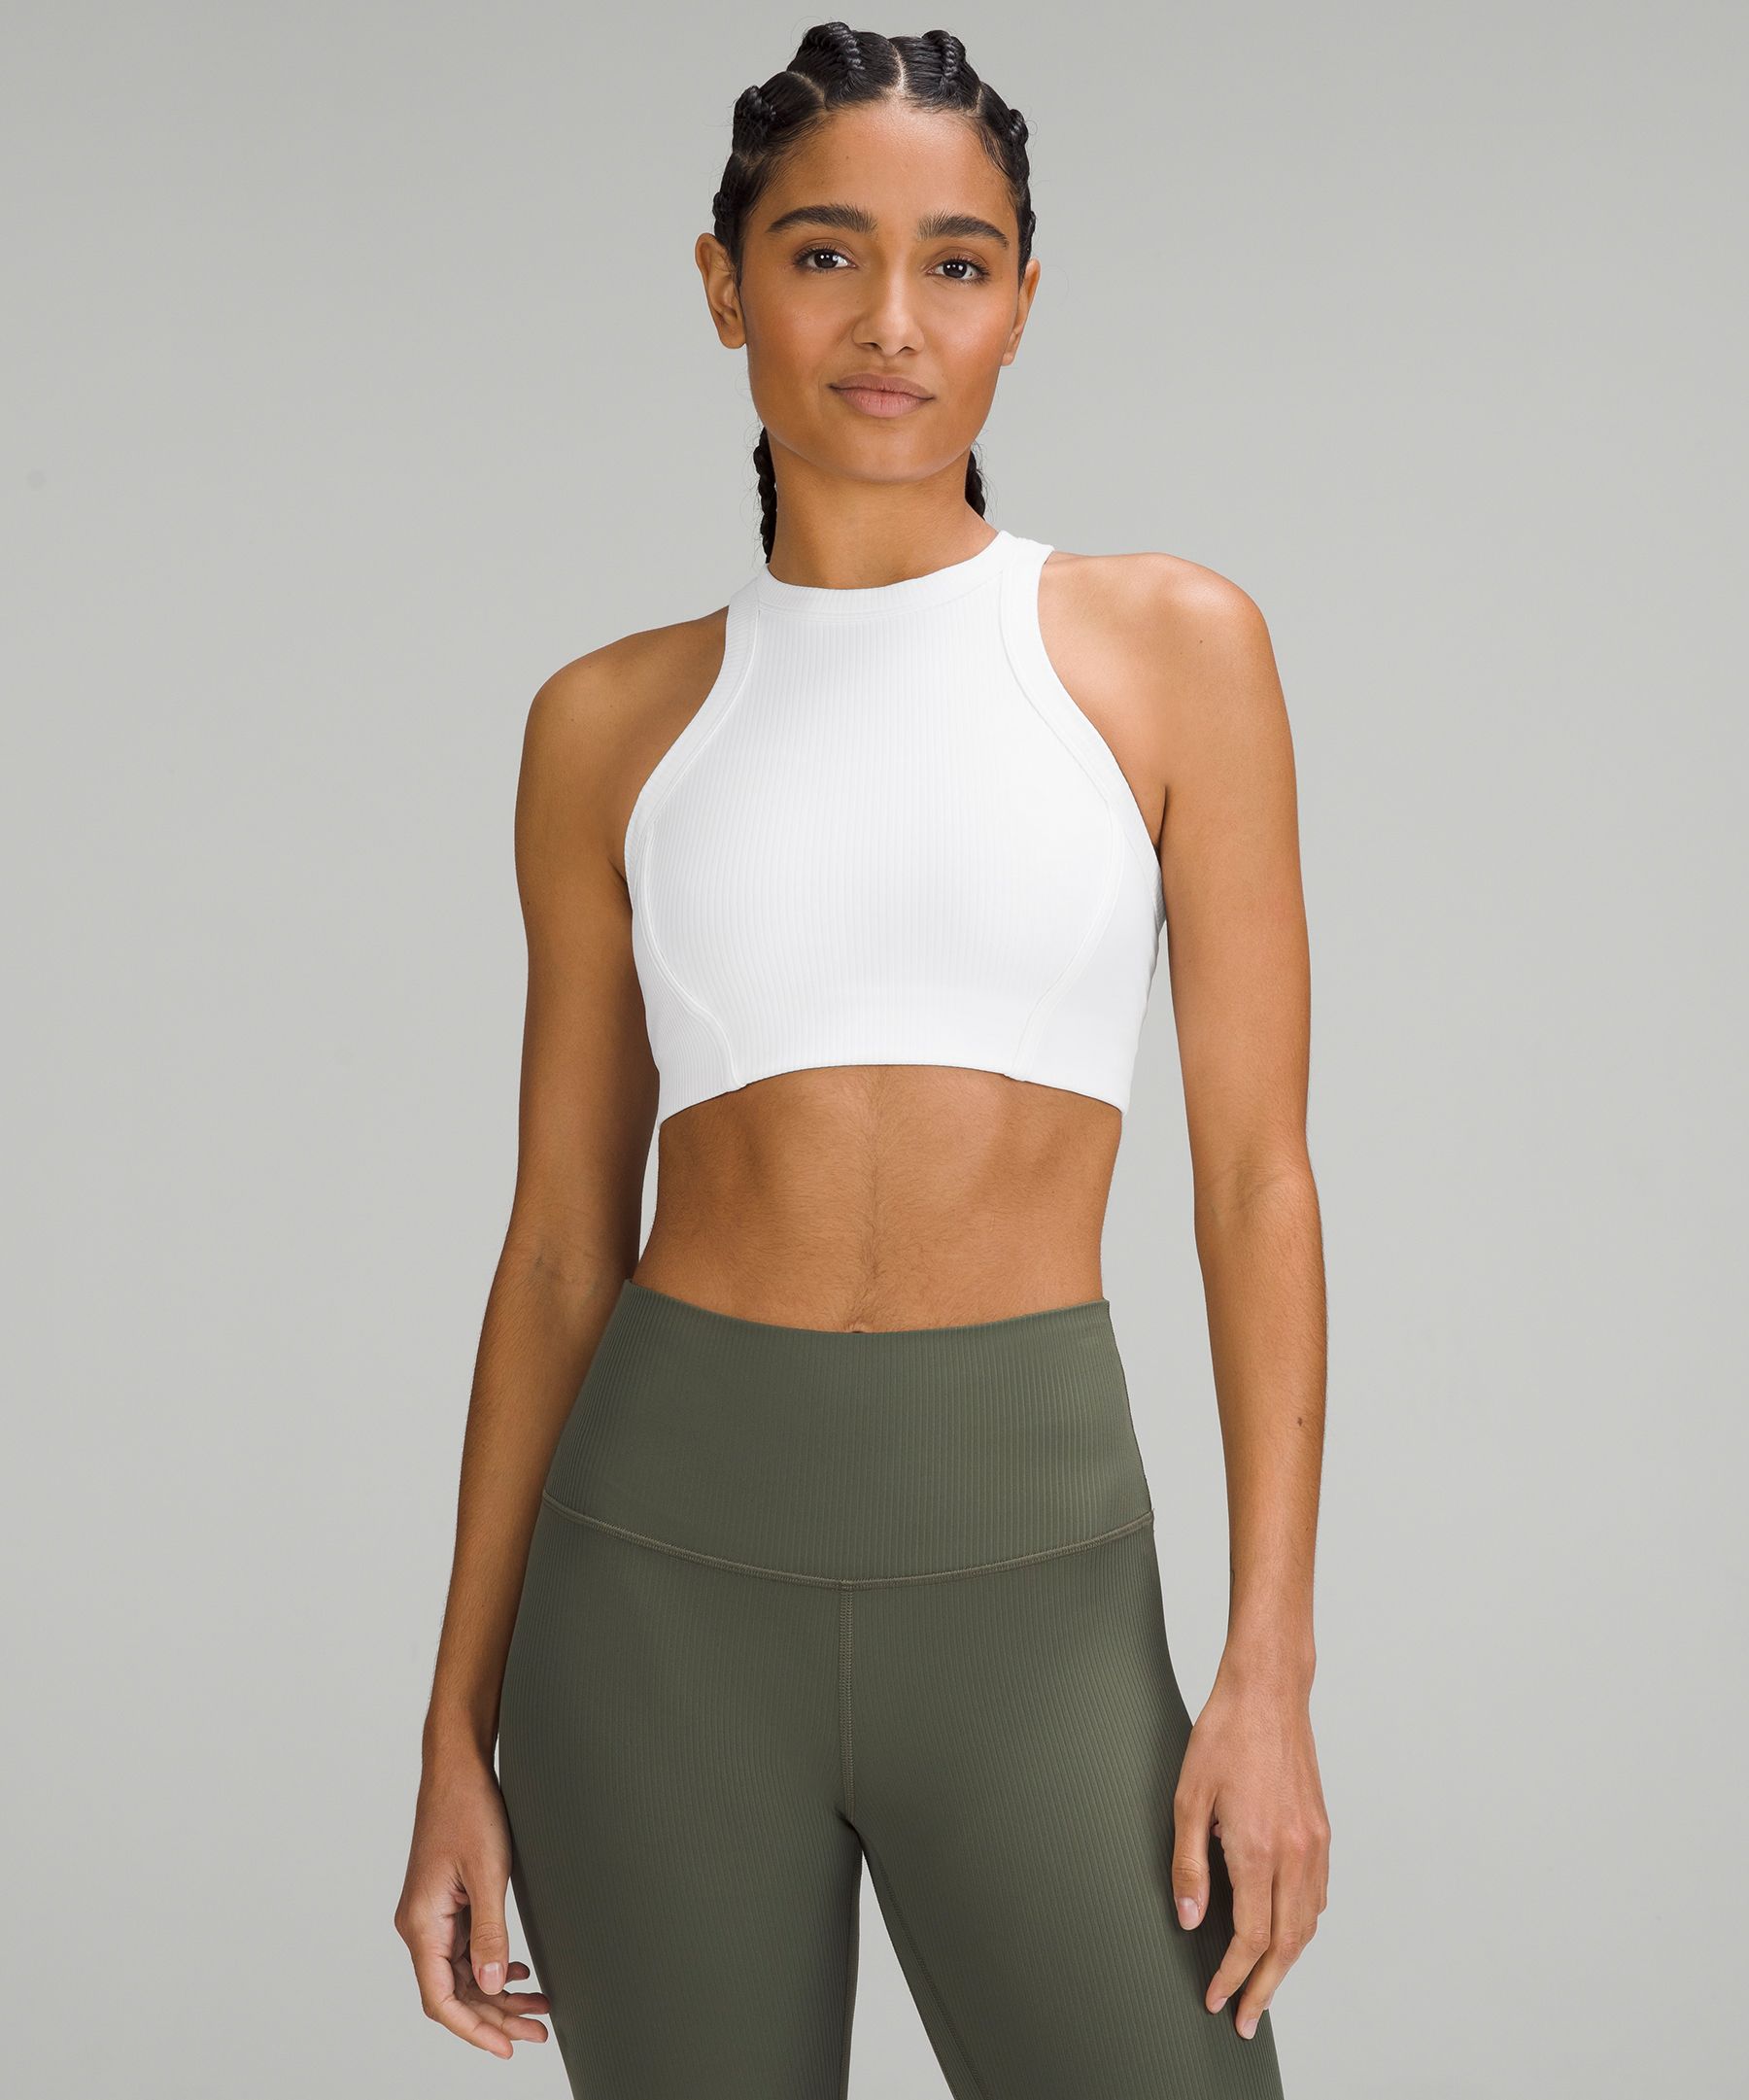 Lululemon Ribbed Nulu High-Neck Yoga Bra Brown - $66 New With Tags